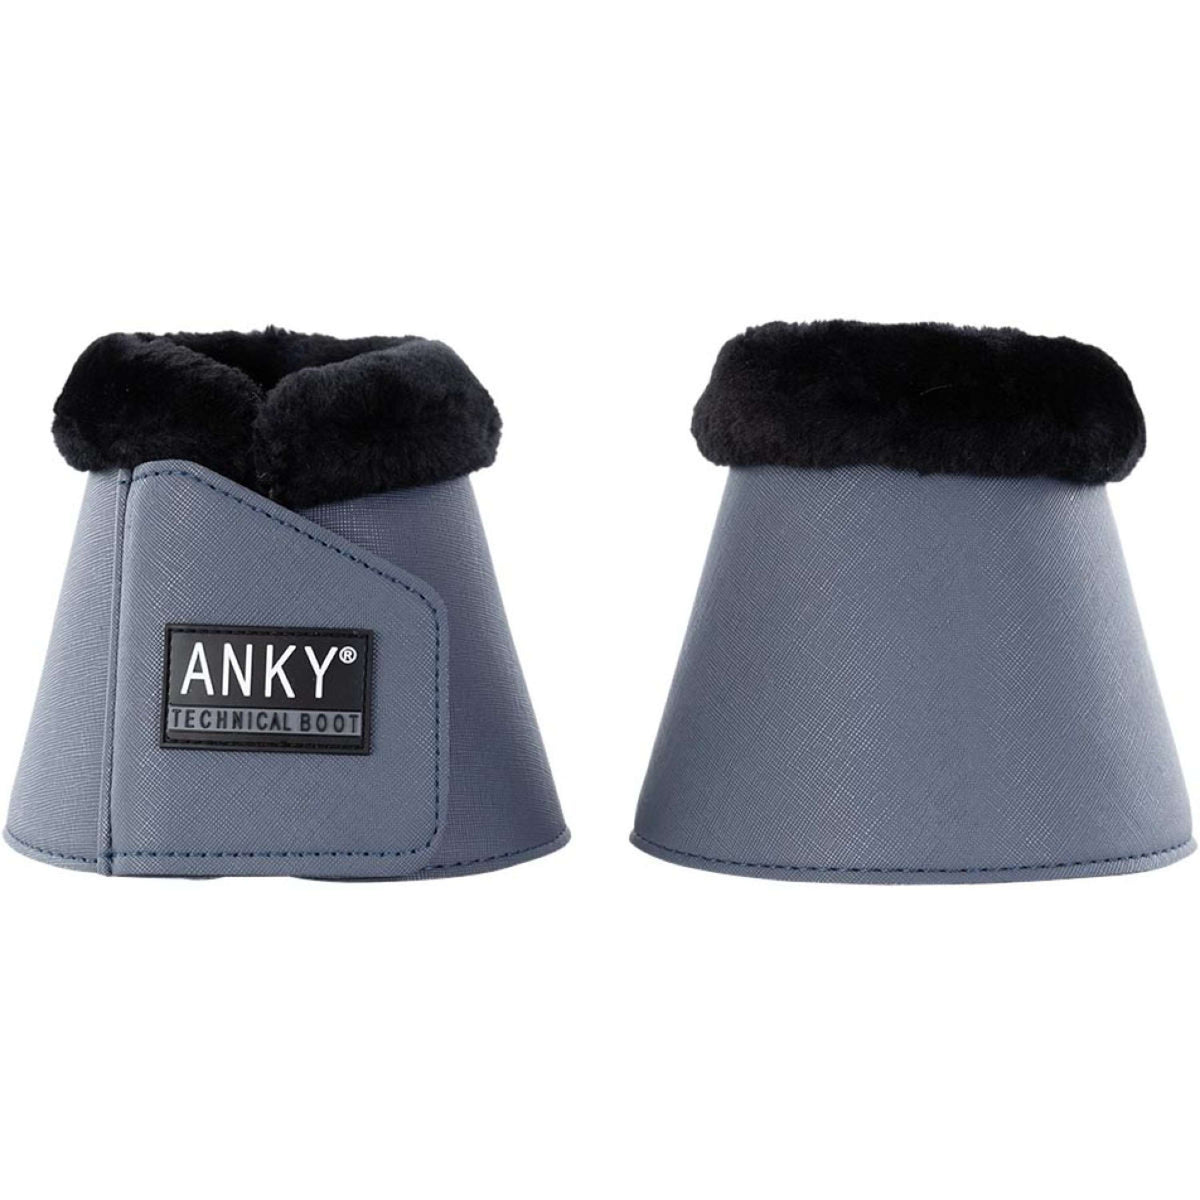 ANKY Cloches d'Obstacles Fur ATB232004 Turbulence